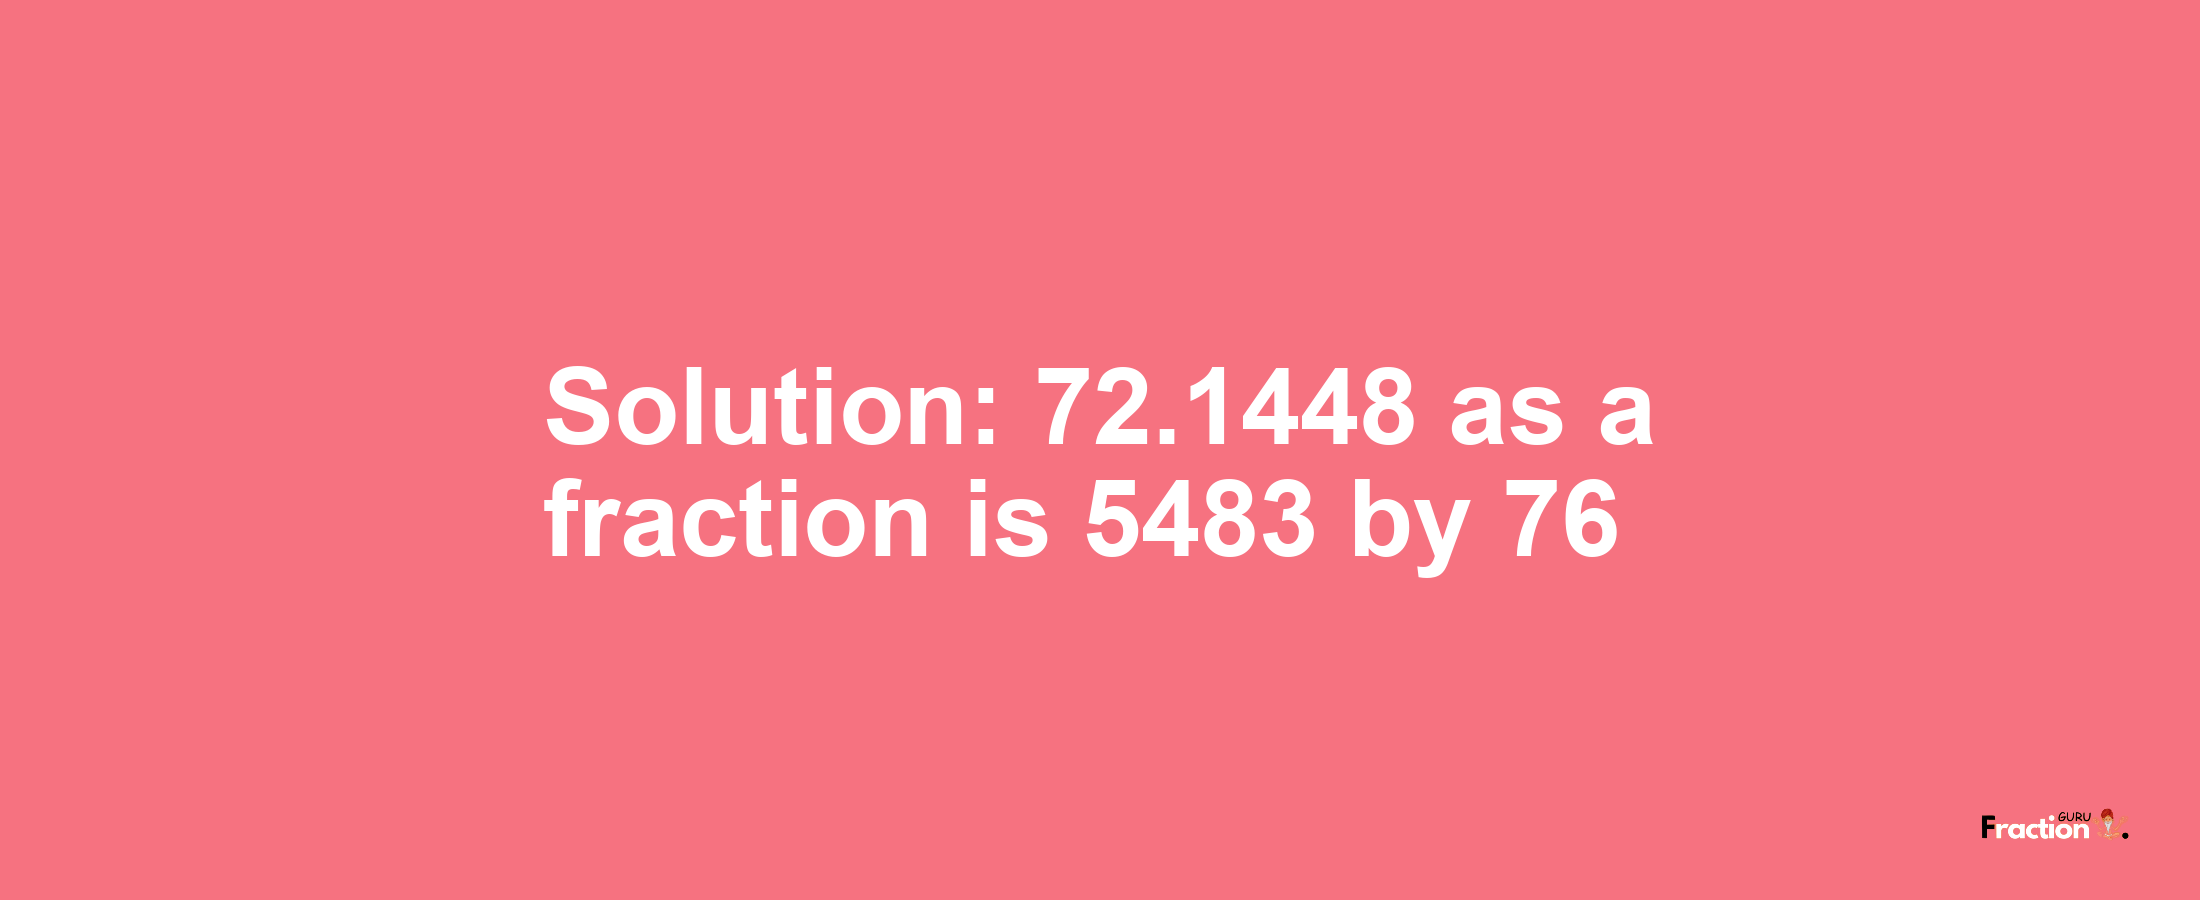 Solution:72.1448 as a fraction is 5483/76